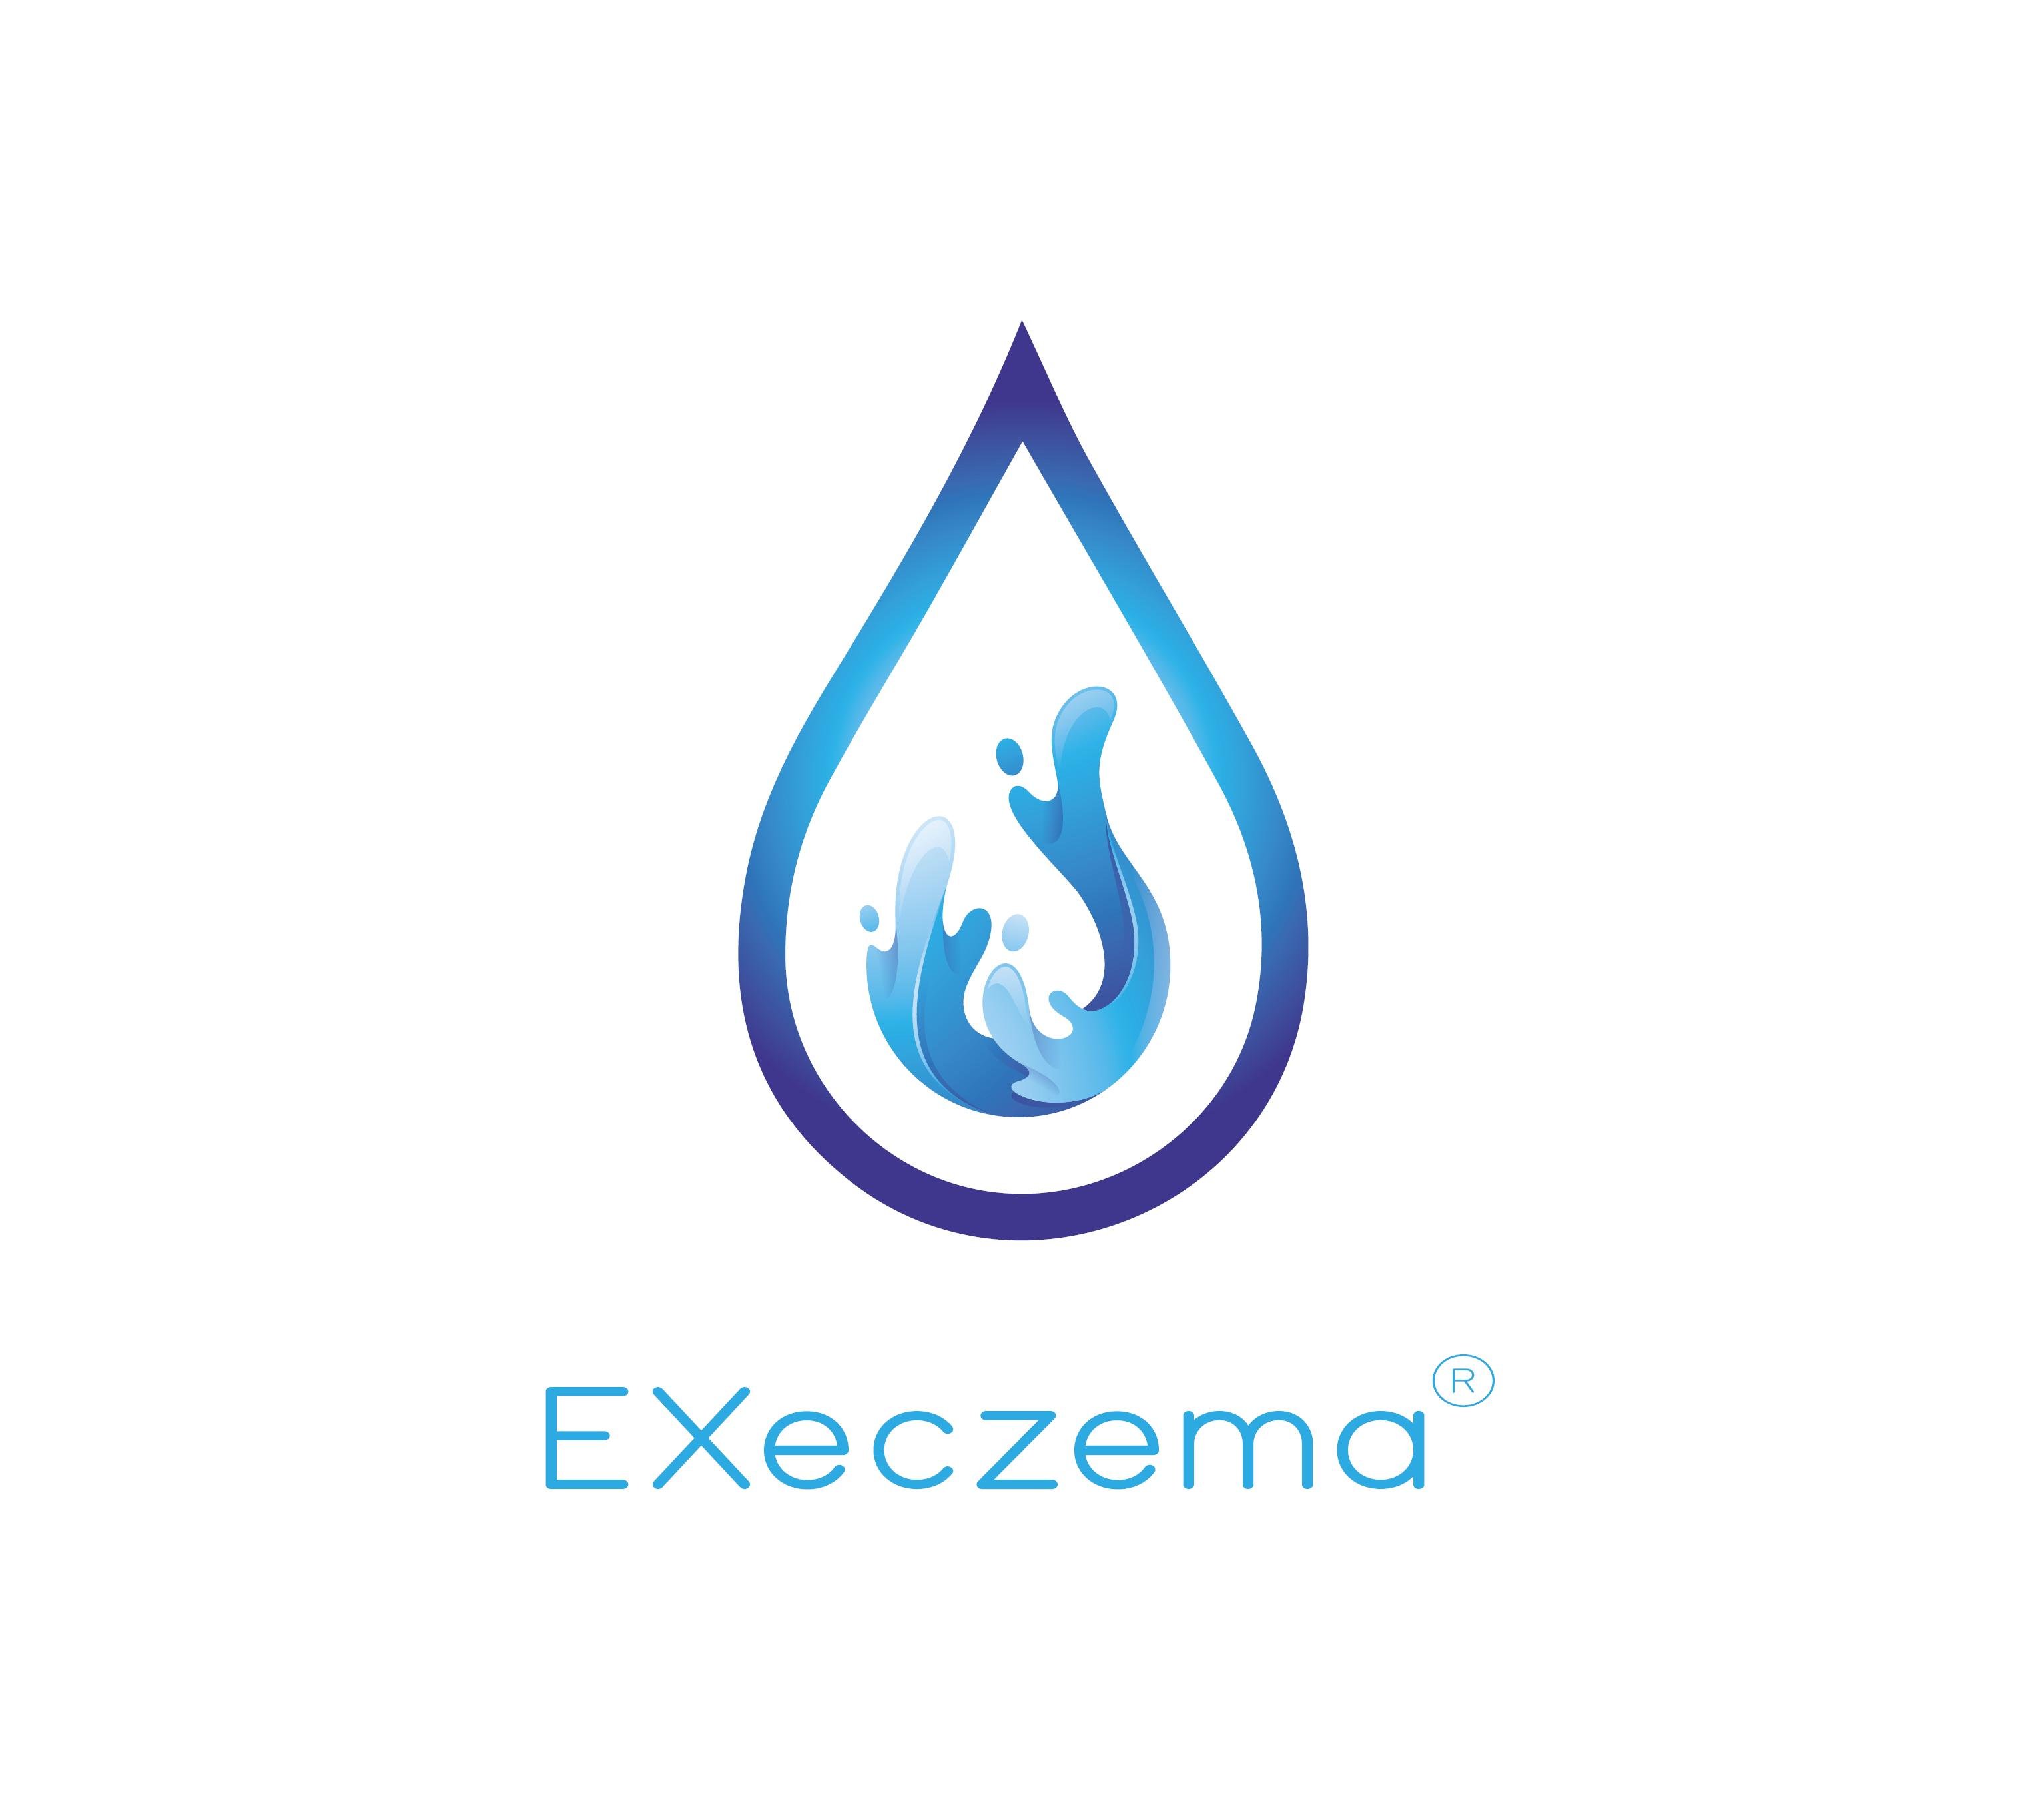 Dr Harley Skin Care UK, EXeczema has arrived to end eczema for good. 
You can see the full range of EXeczema products on our website below
https://t.co/uFCYoFN6Ae